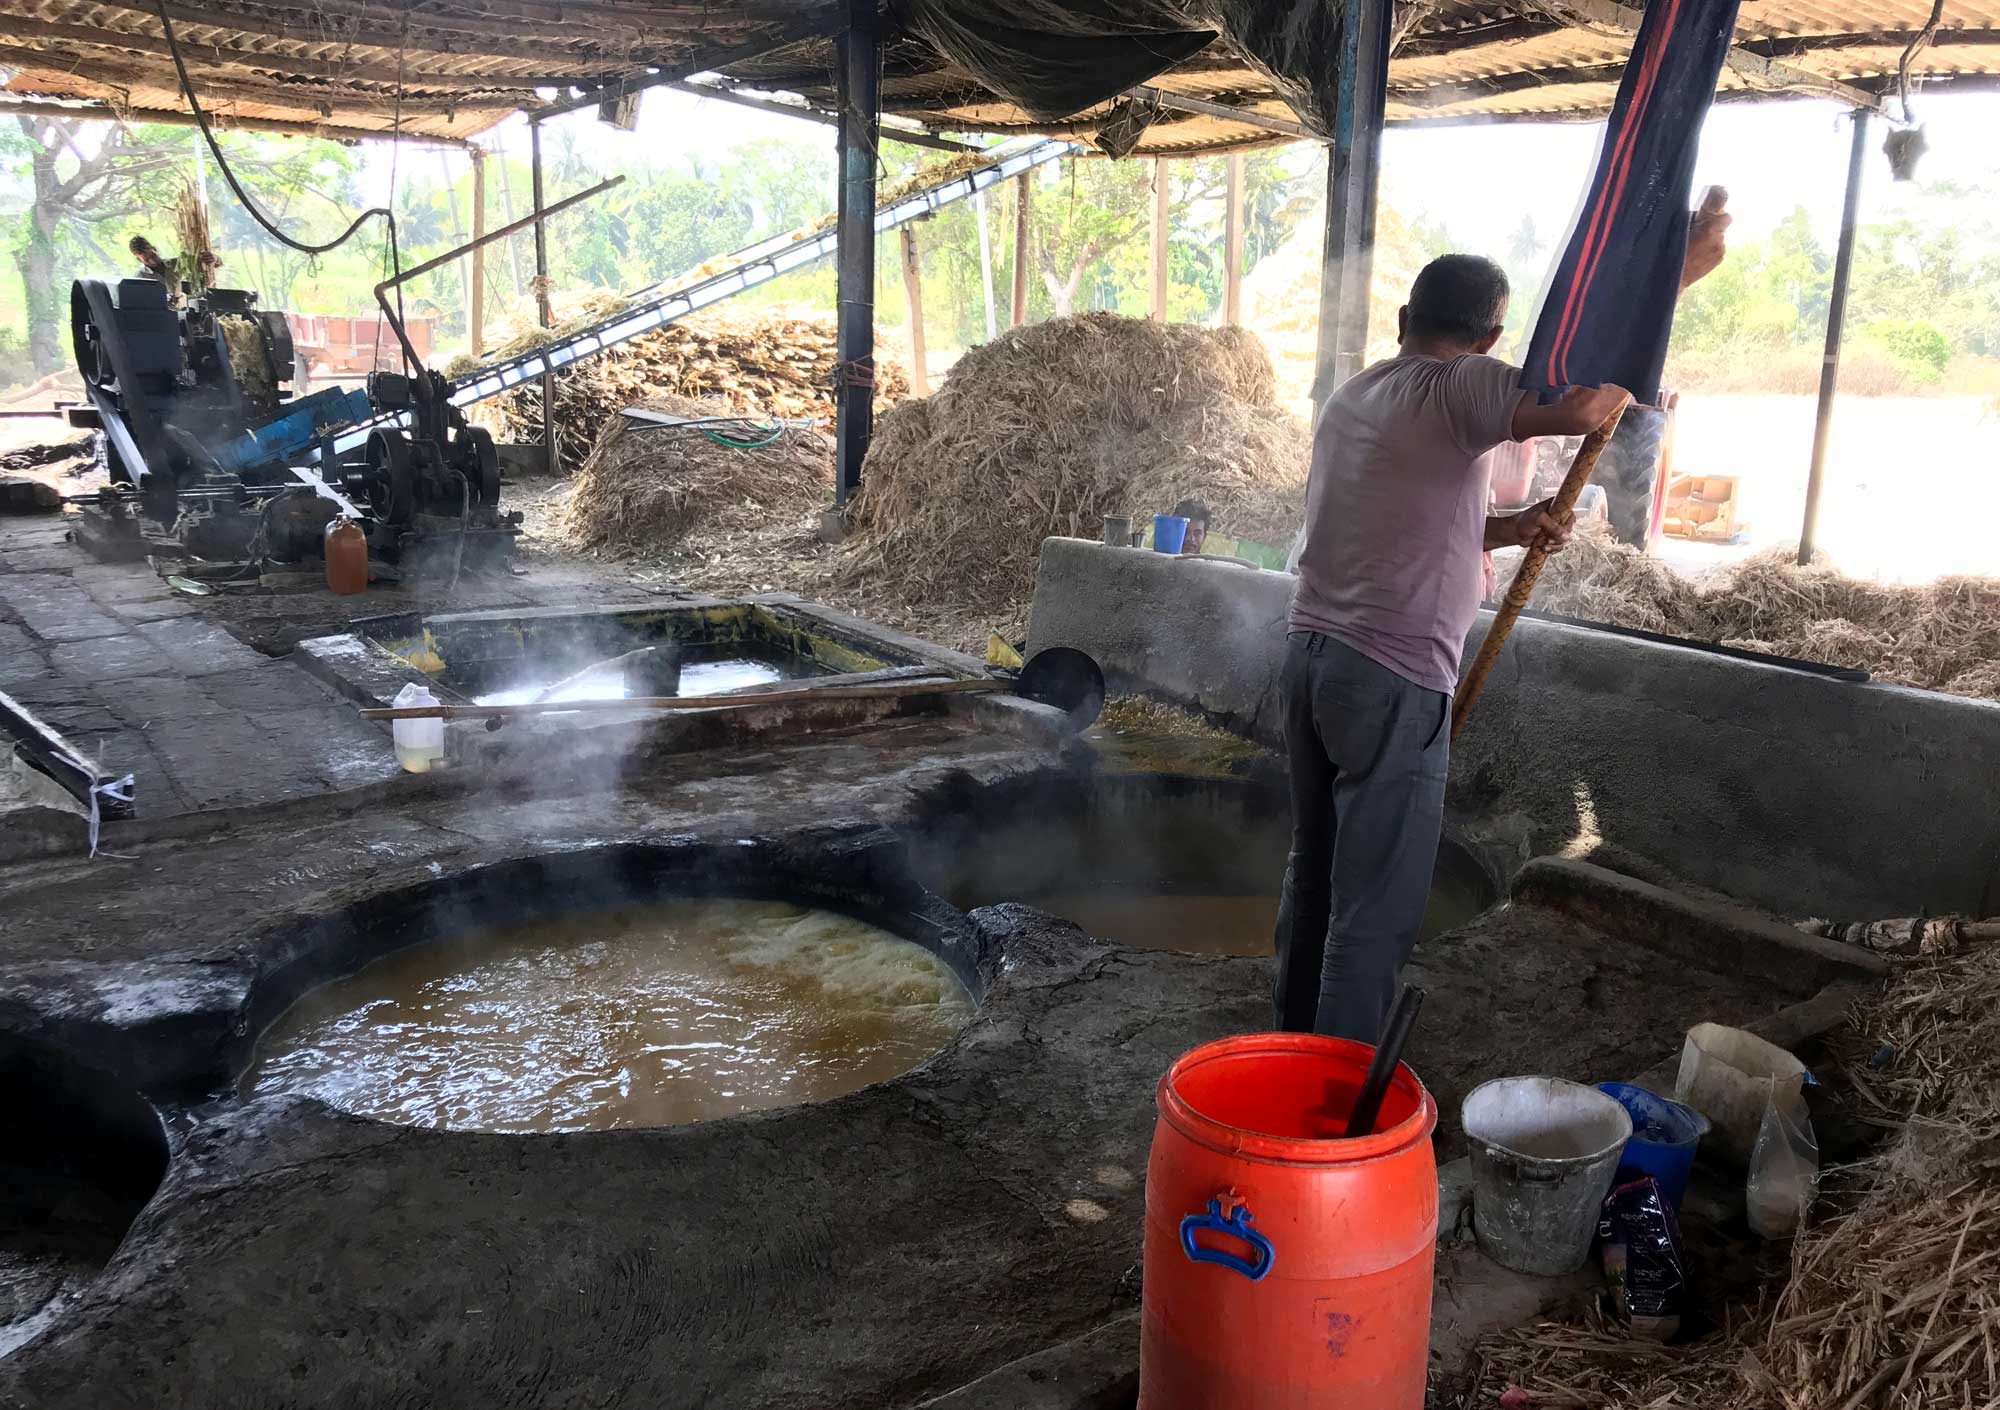 Photograph of a man making jaggery in Karnataka, India. The photo shows a man stirring cane syrup cooking in a pan in the ground with a long pole. Another pan with cooking syrup is on his left. In the background, a grinding mill and large piles of bagasse can be seen.